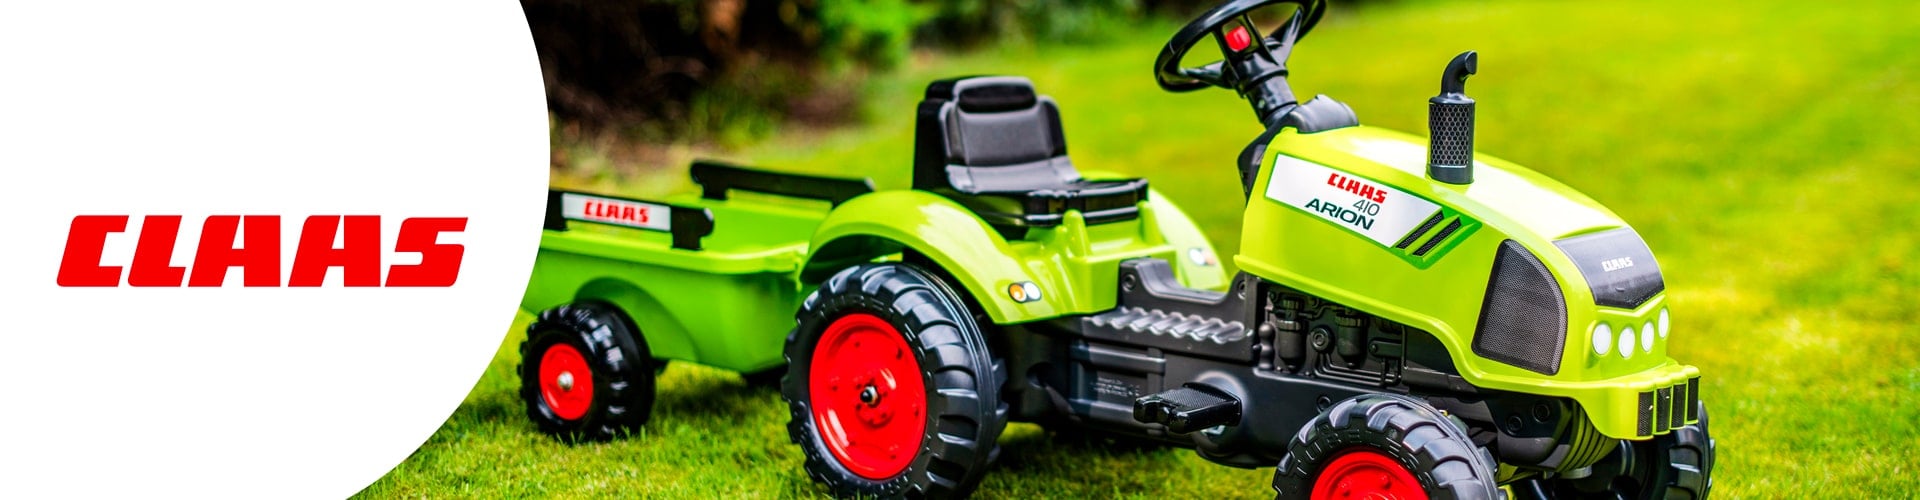 rolling toy for children from Claas license